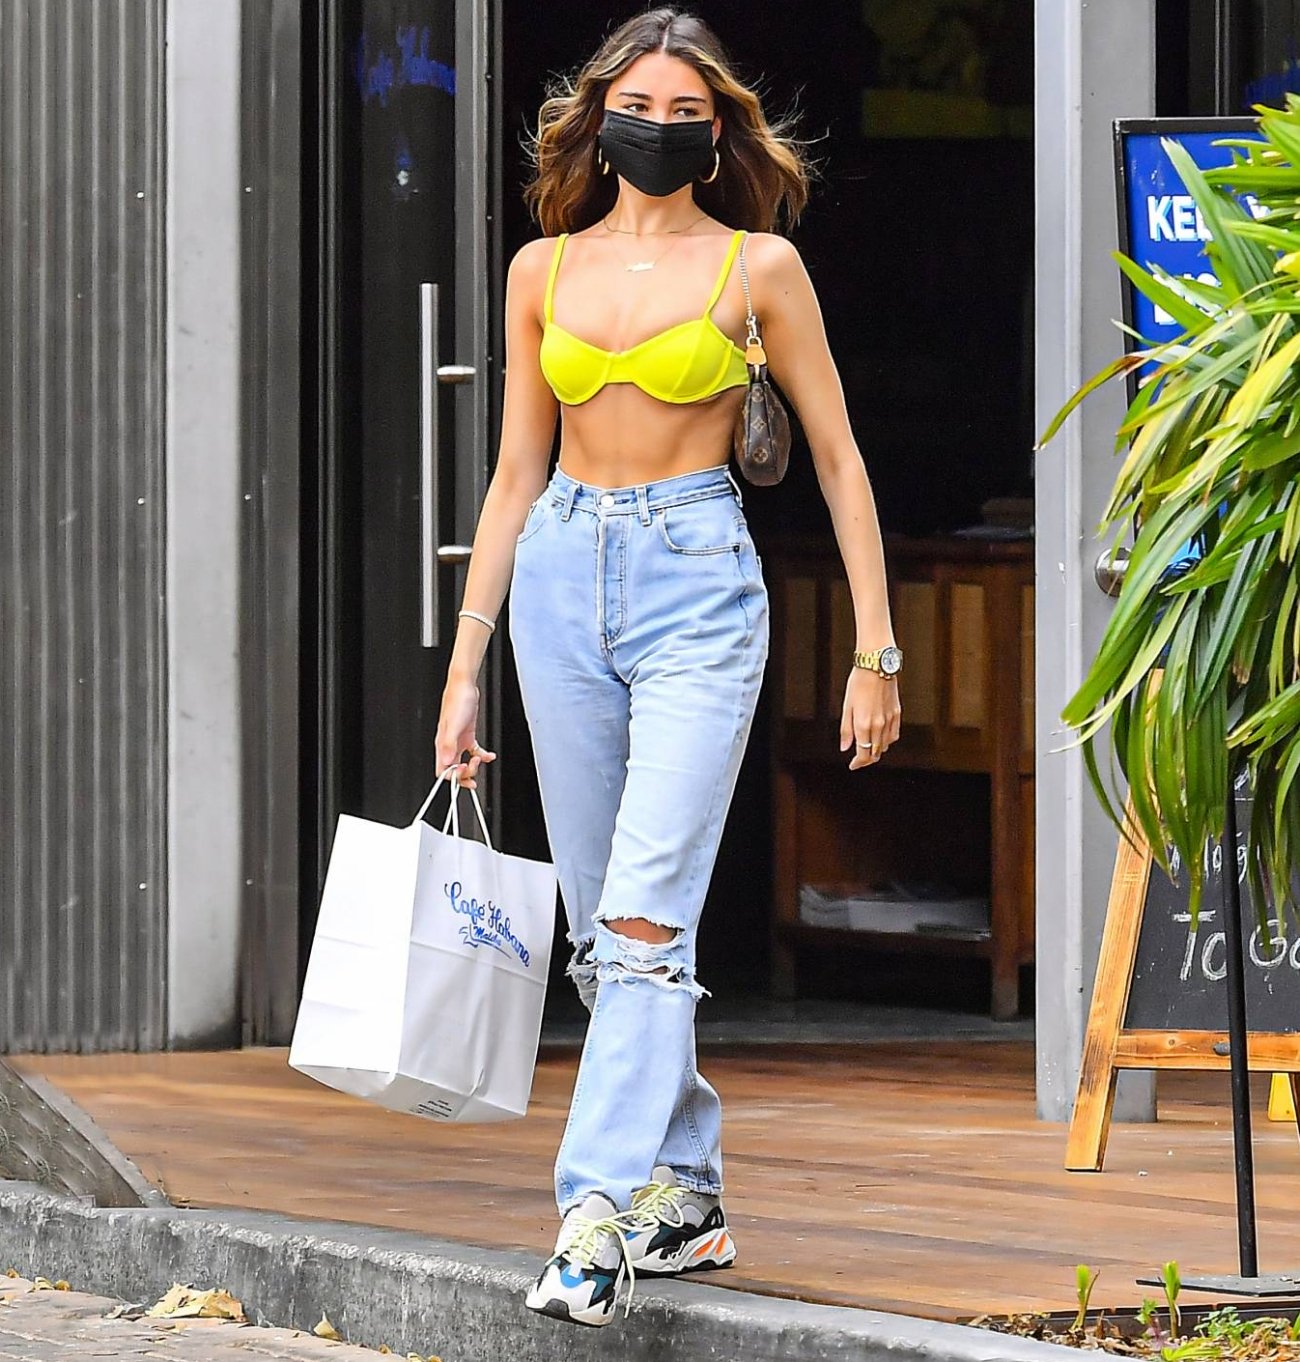 Individualitet Hurtig kighul Denimology on X: "Madison Beer in Hi-Rise Ripped Straight Jeans -  https://t.co/ggIahCTqMP @madisonbeer #highwaistedjeans #straightjeans  #rippedjeans #distressed #fashionable #cool #bikinitop #shopping #outfit  @adidasyeezy #sneakers @rolex #watch @luvaj ...